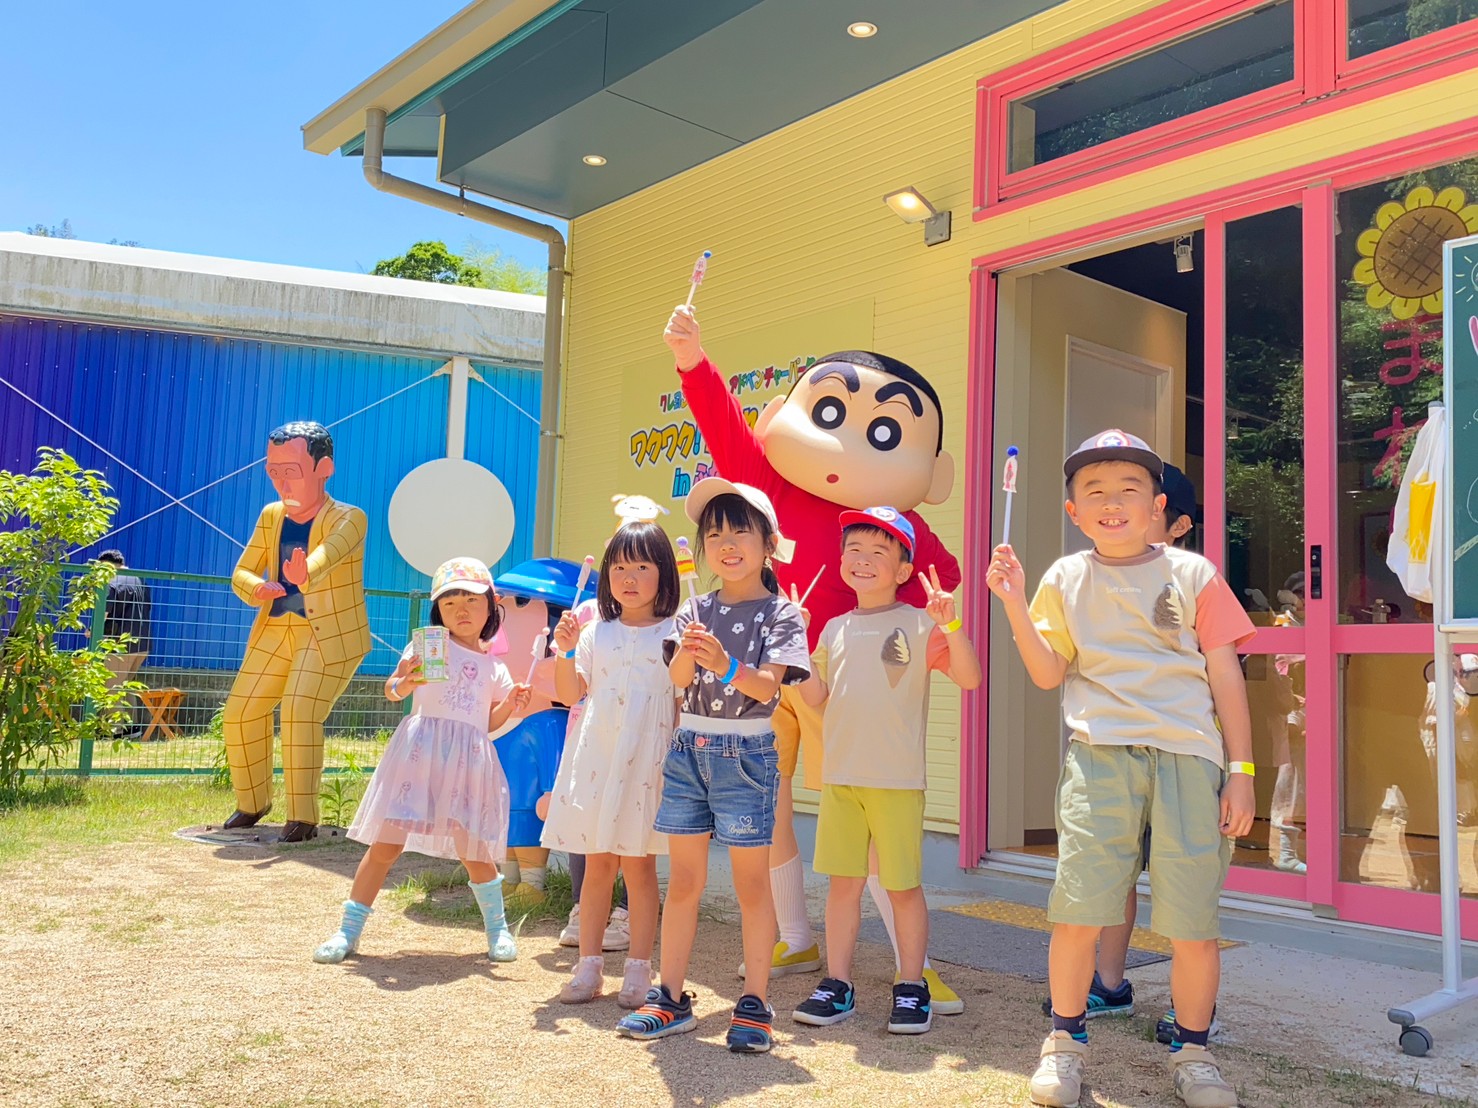 Crayon Shin-chan Adventure Park] “Exciting! Hide and Seek Maze in